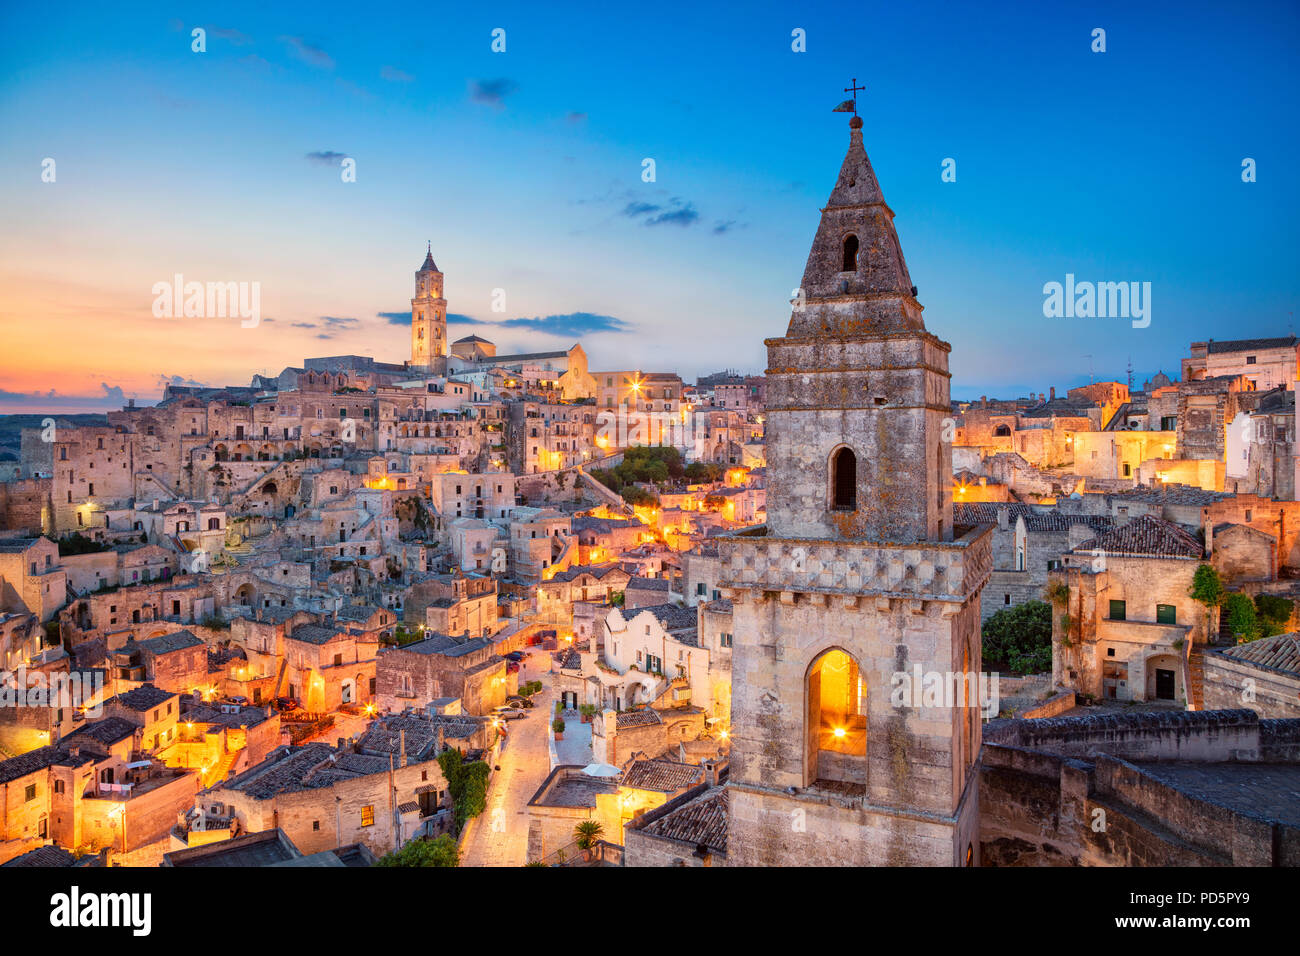 Matera, Italy. Cityscape image of medieval city of Matera, Italy during beautiful sunrise. Stock Photo